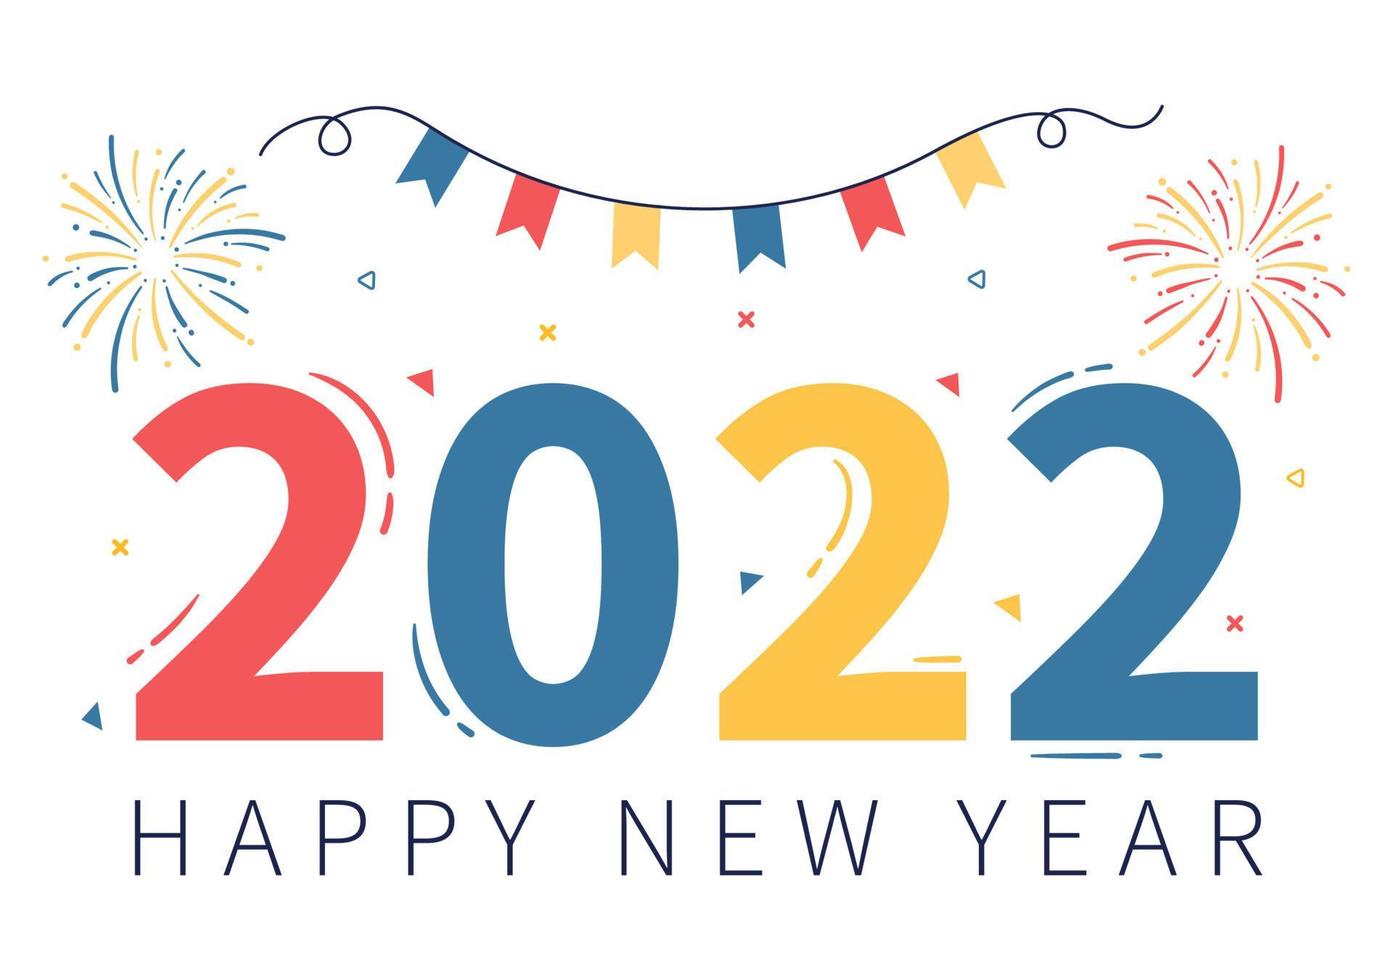 Happy New Year 2022 Template Flat Design Illustration with Ribbons and ...